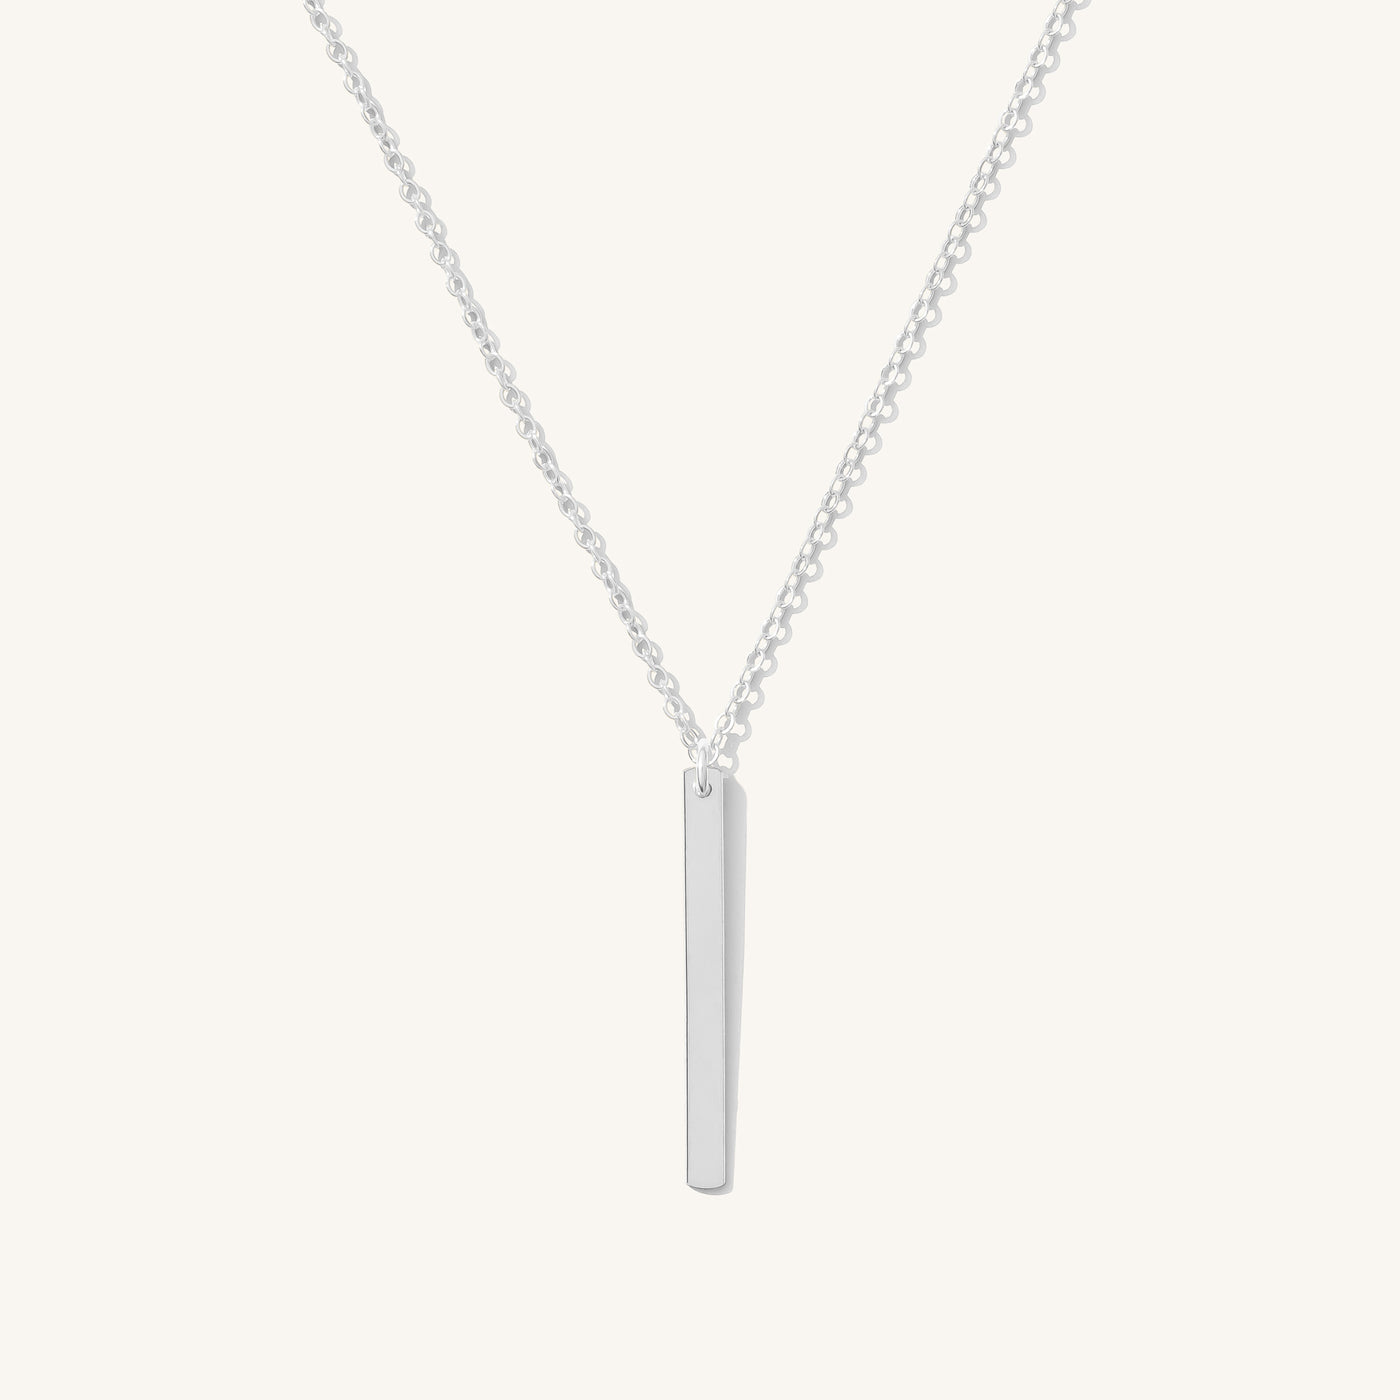 Hanging Bar Necklace | Simple & Dainty Jewelry